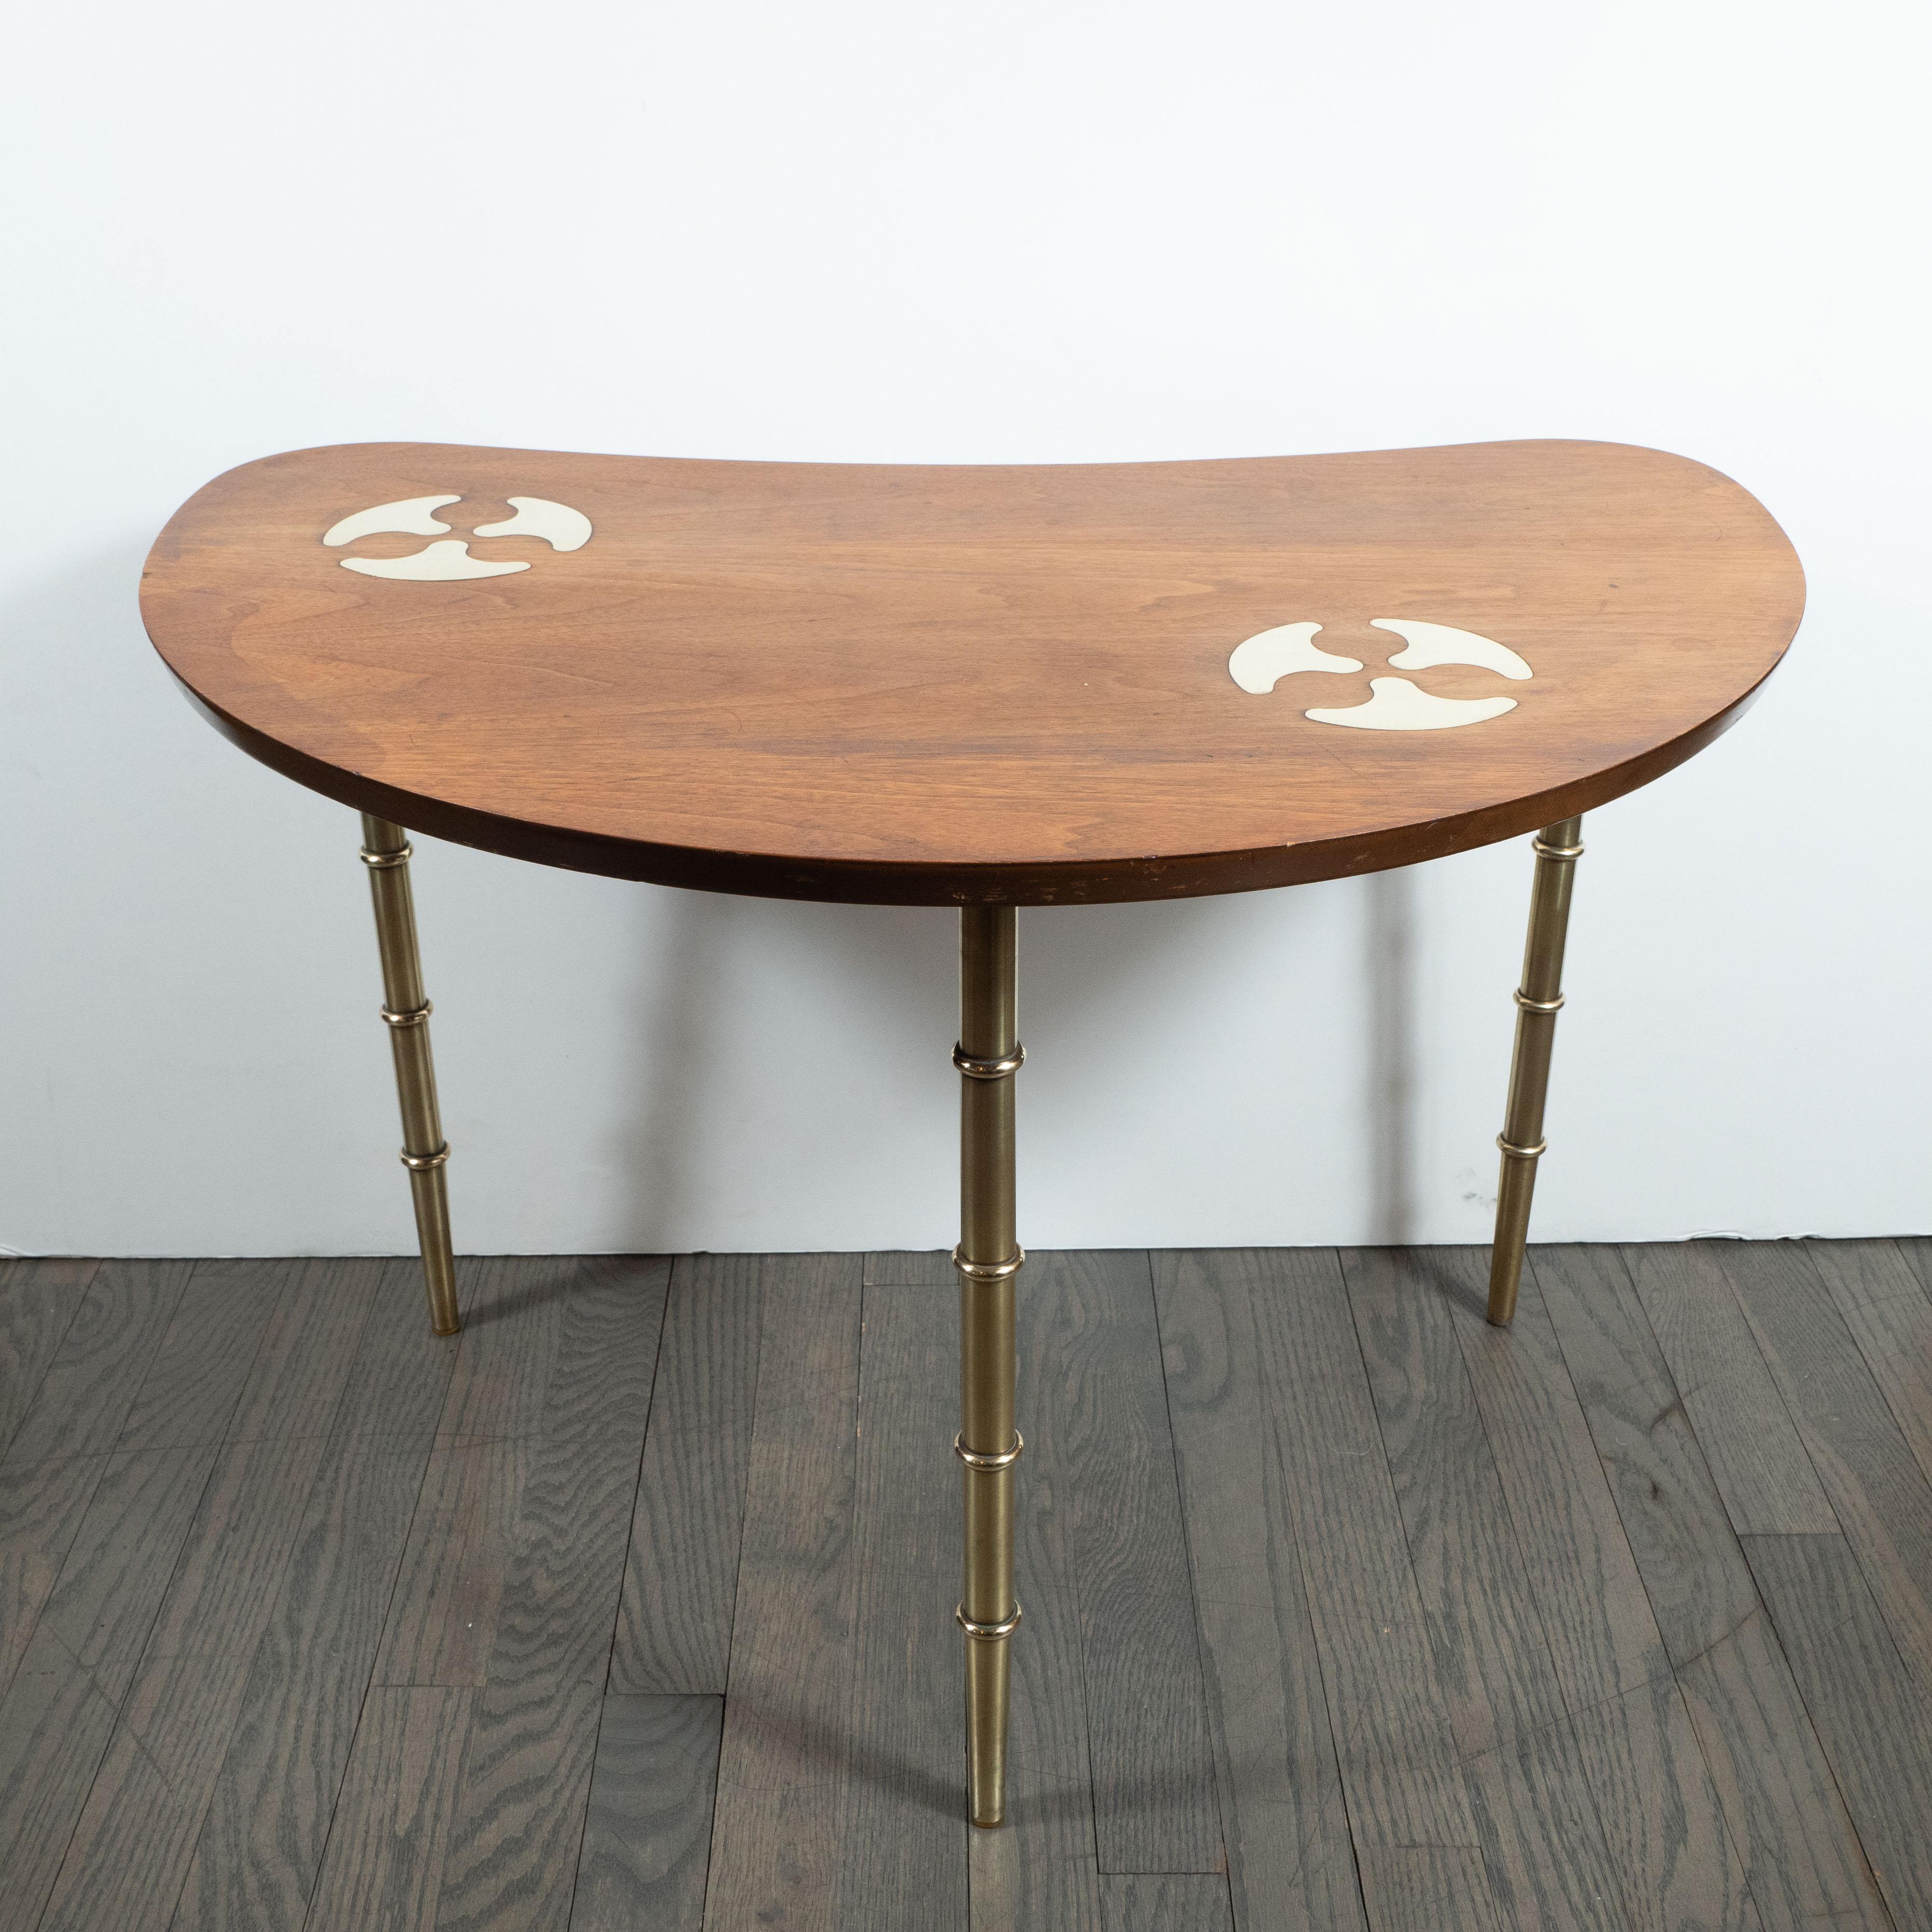 This refined Mid-Century Modern table was realized by the celebrated 20th century design firm, Mastercraft, in the United States, circa 1970. It features an amorphic bowfront top in hand rubbed walnut with a pair of brass inlays consisting of three